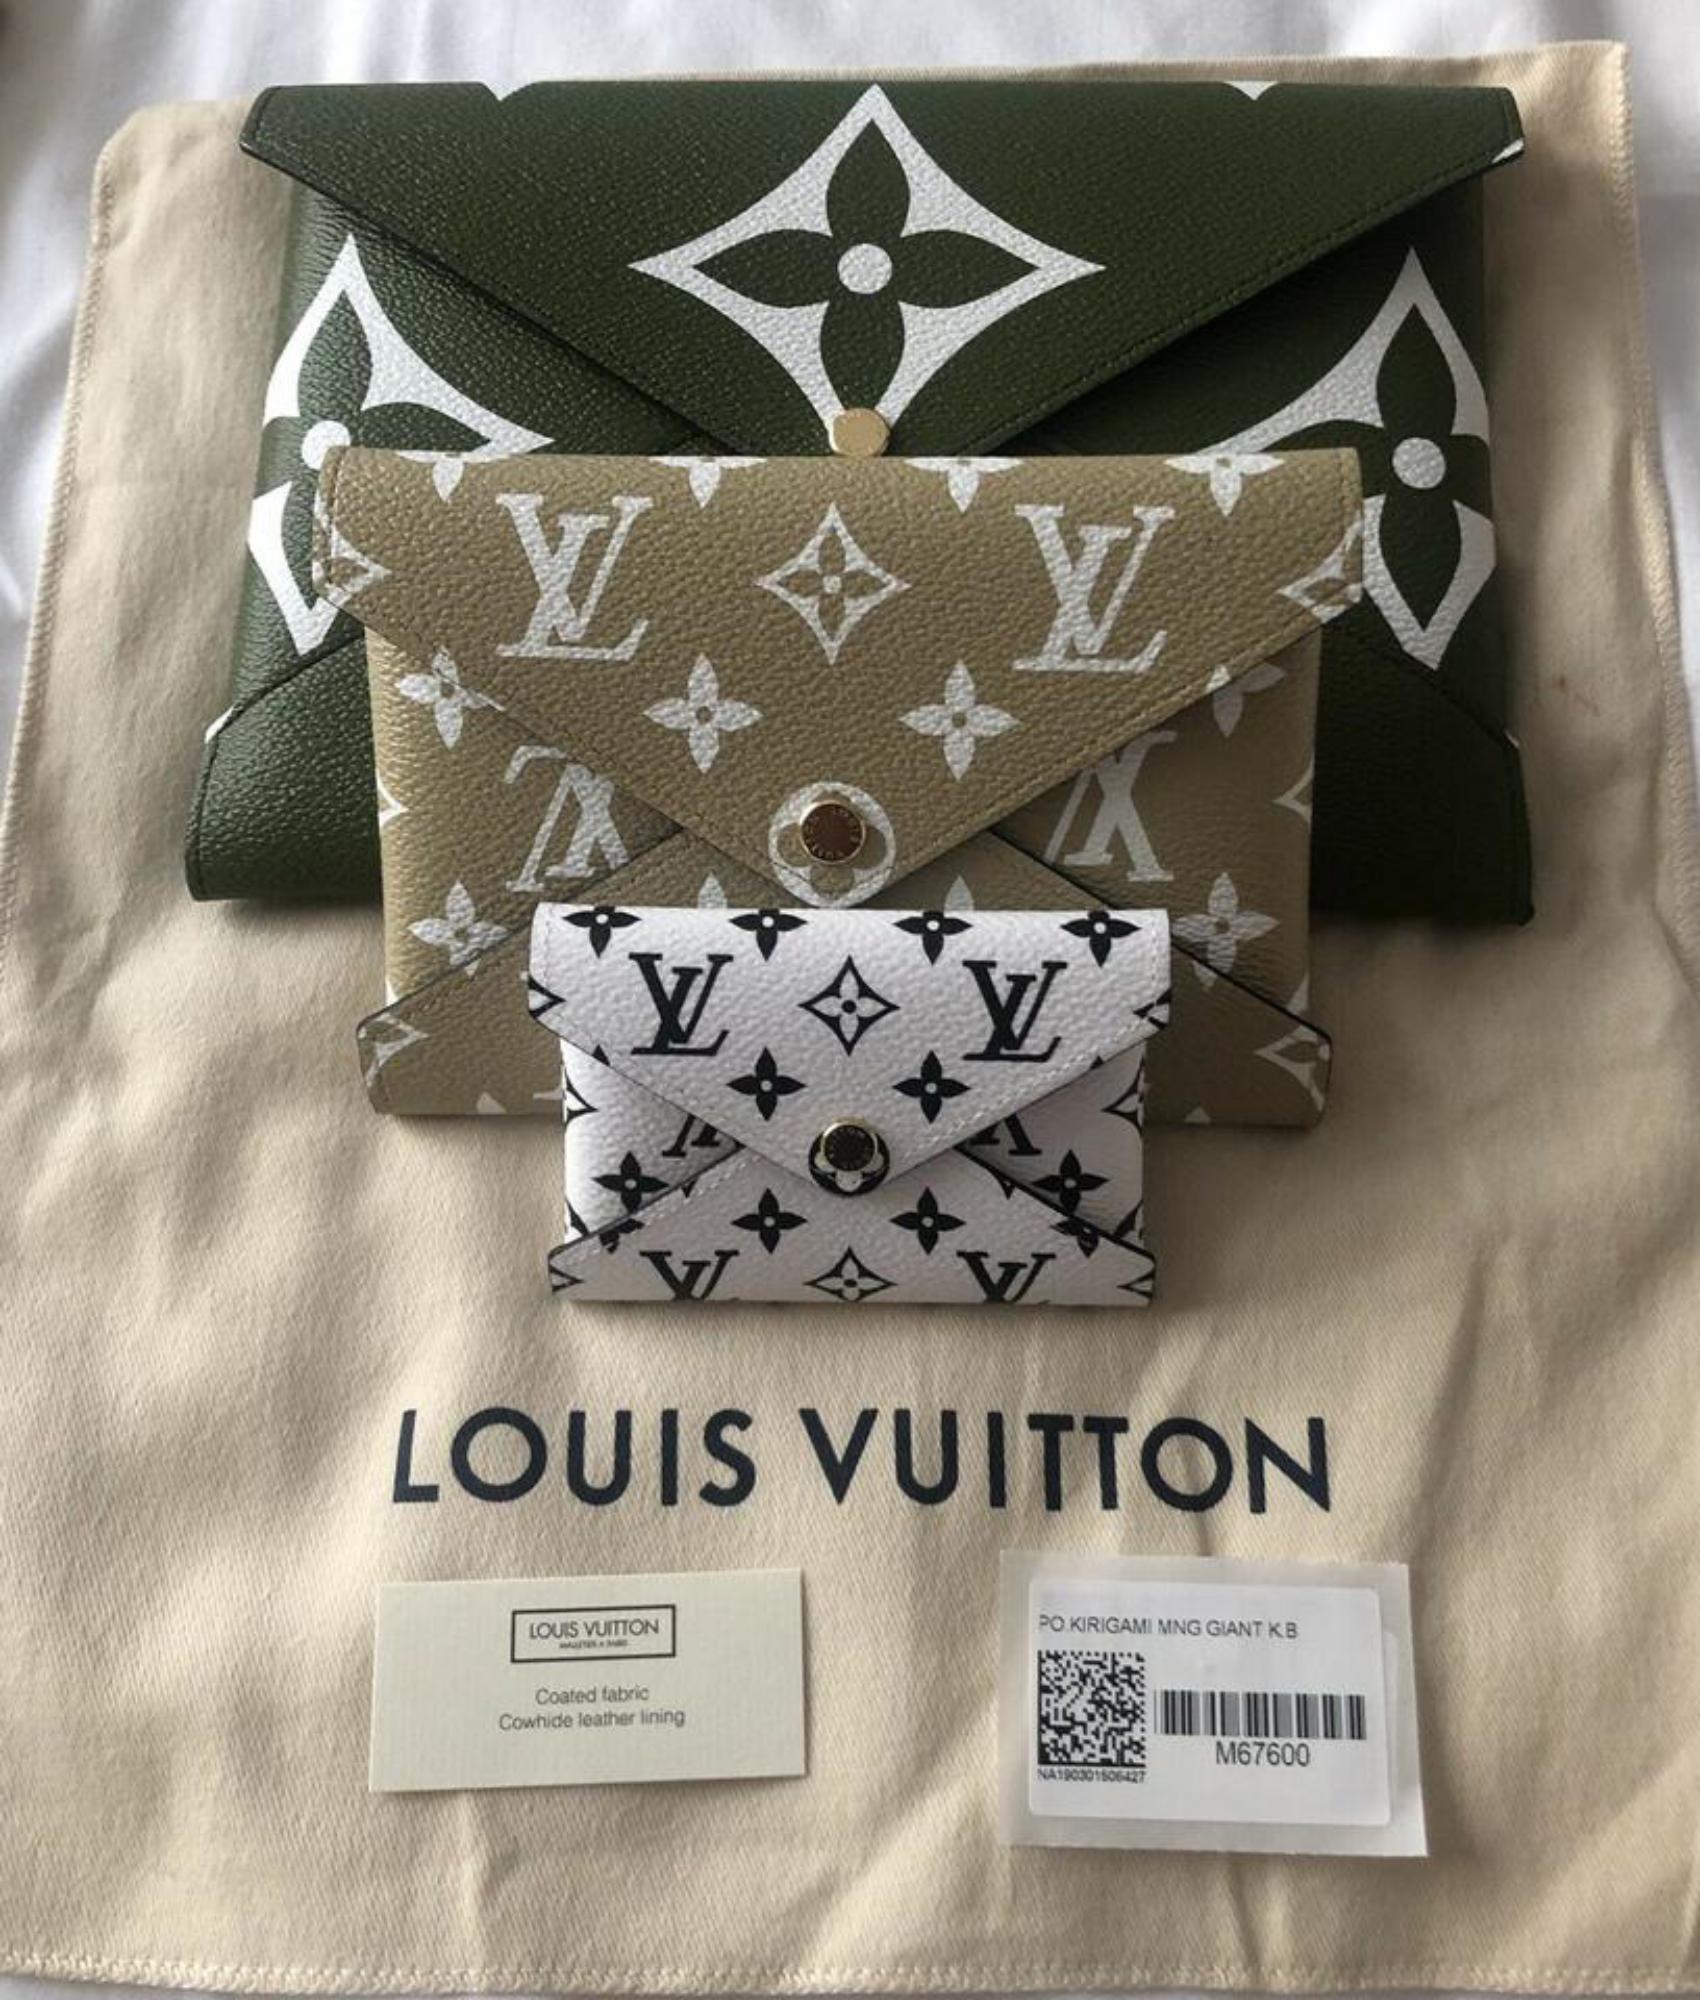 Condition:
New with tags: A brand-new, unused, and unworn item (including handmade items) in the original packaging (such as ... Read more
Product Line:Louis Vuitton Pochette
Country/Region of Manufacture:FranceBrand:
Louis